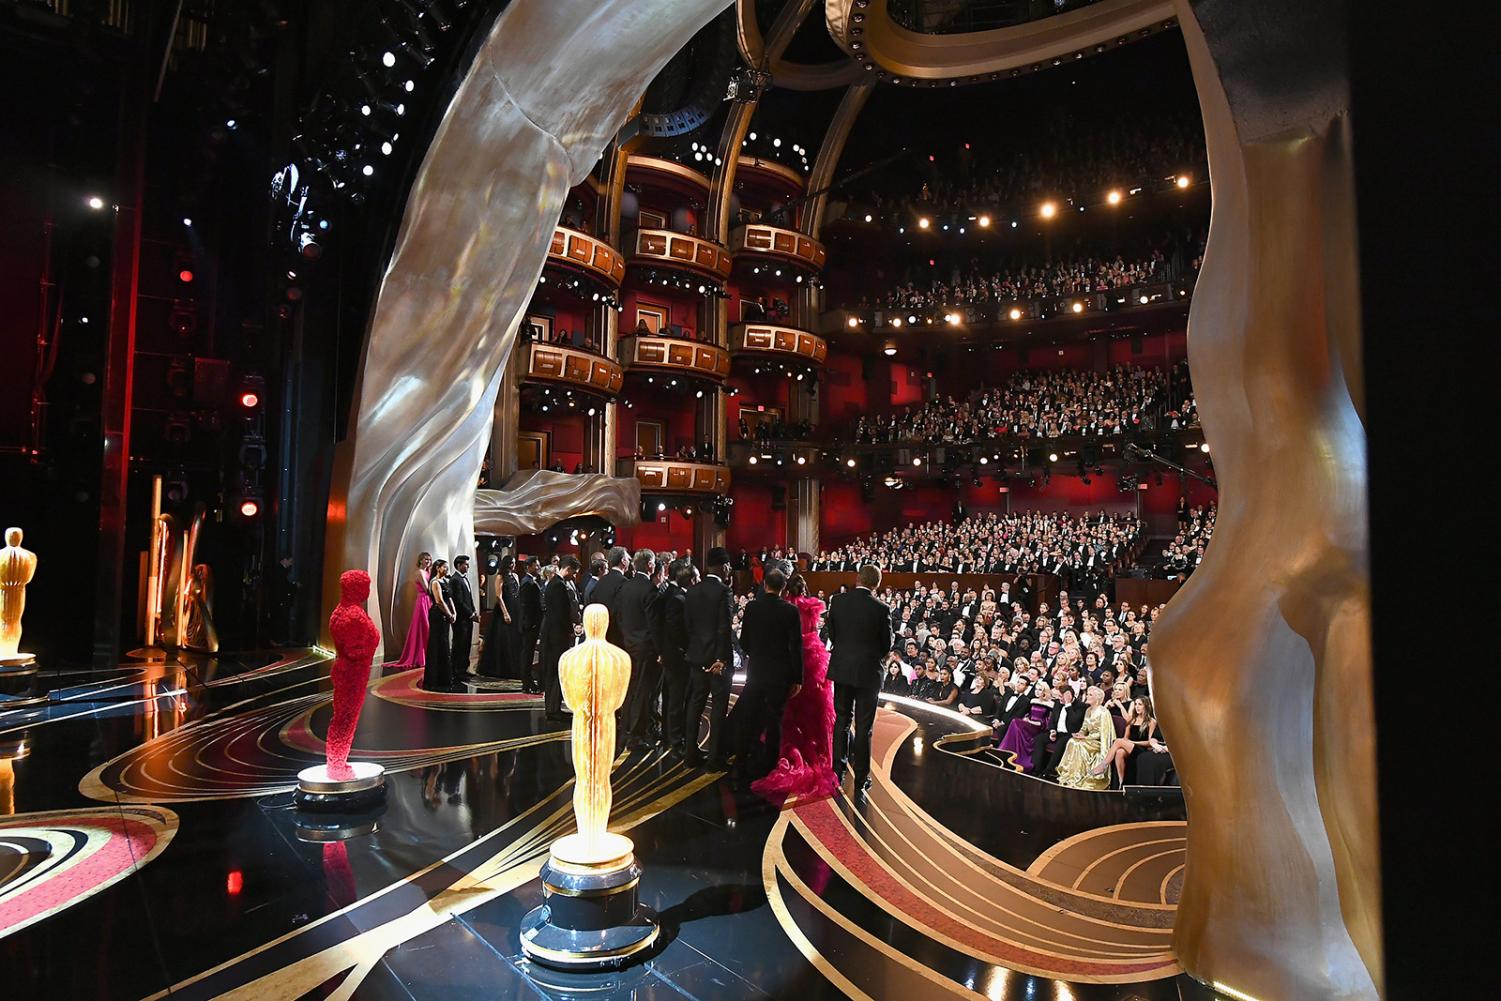 Banerjee: The Oscars don’t conquer their diversity issues -